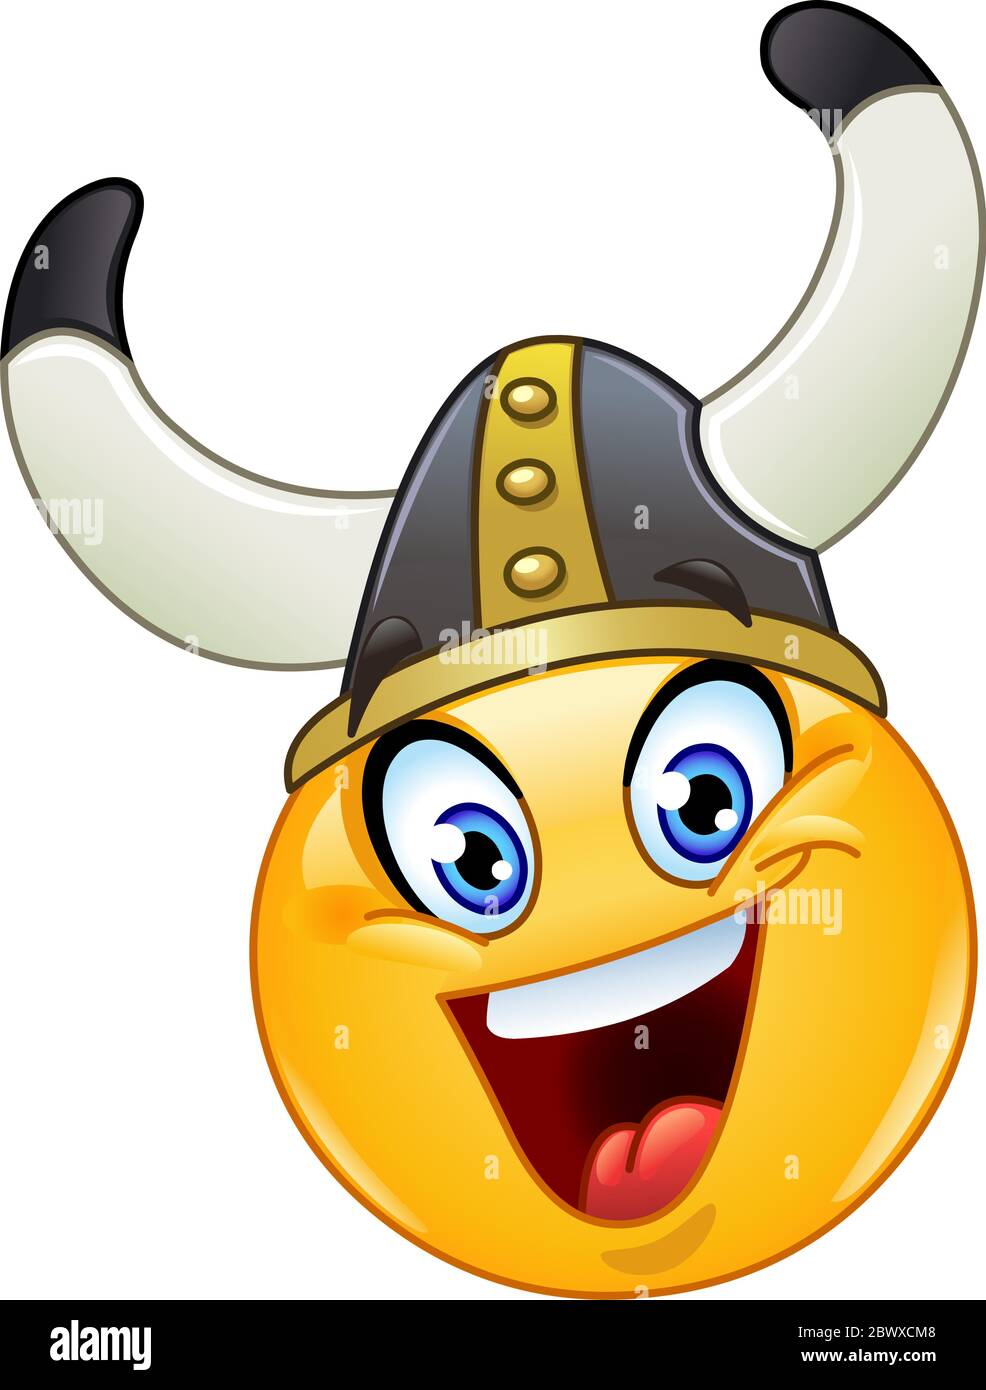 Emoticon with a Viking helmet Stock Vector